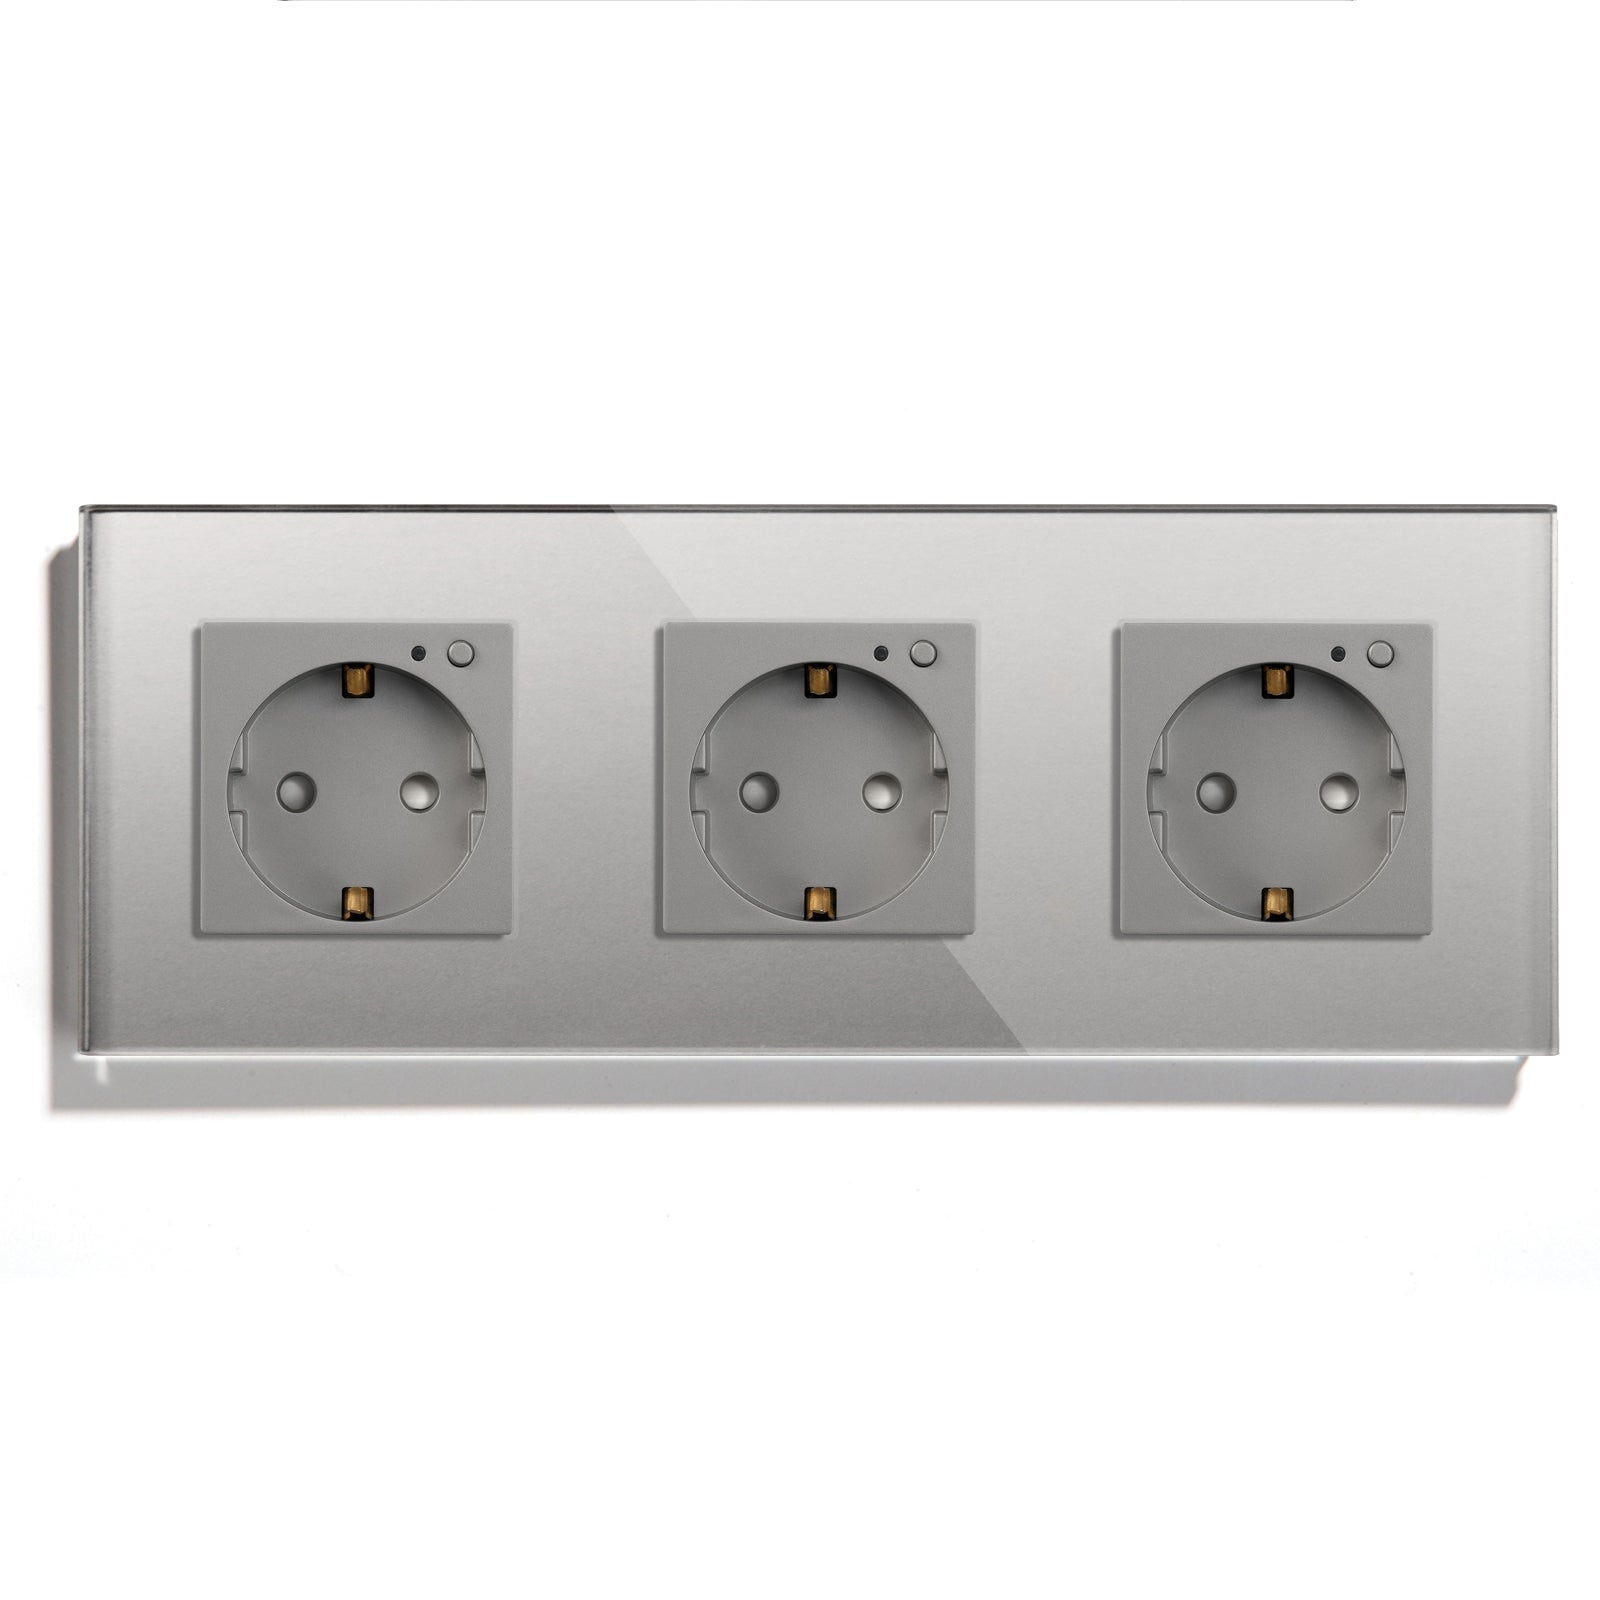 BSEED ZigBee EU Wall Sockets Power Outlets Kids Protection Wall Plates & Covers Bseedswitch grey Triple 